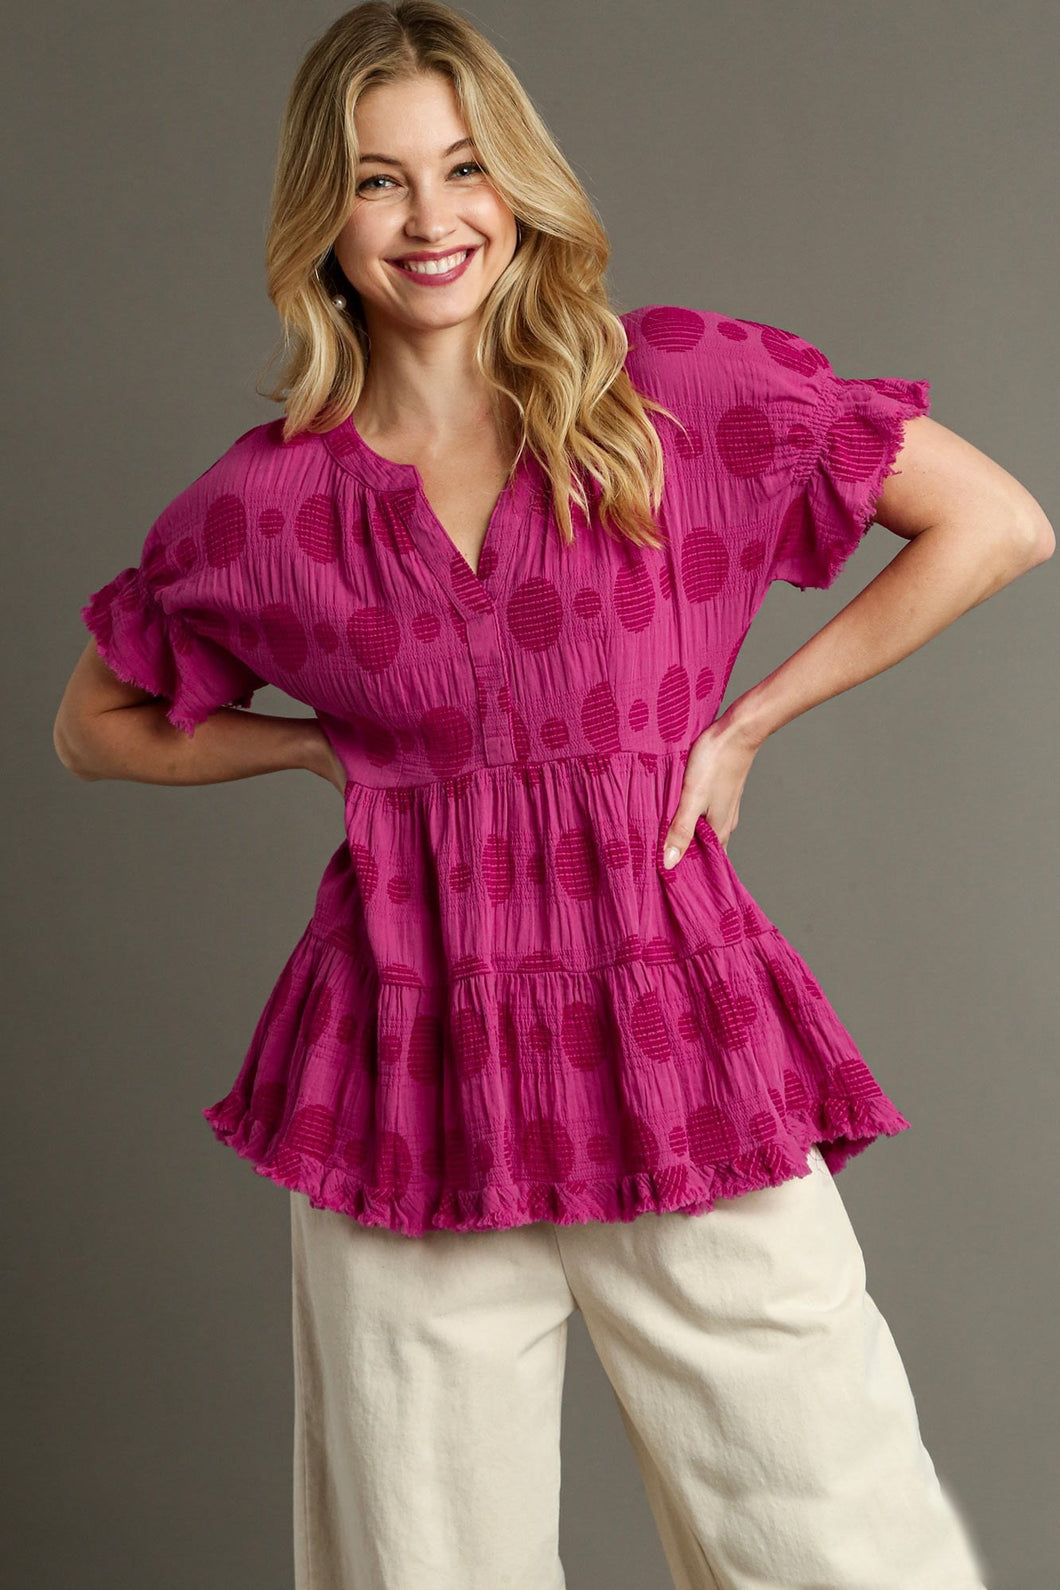 Umgee Baby Doll Top with Textured Swiss Dot Jacquard Print in Raspberry Shirts & Tops Umgee   